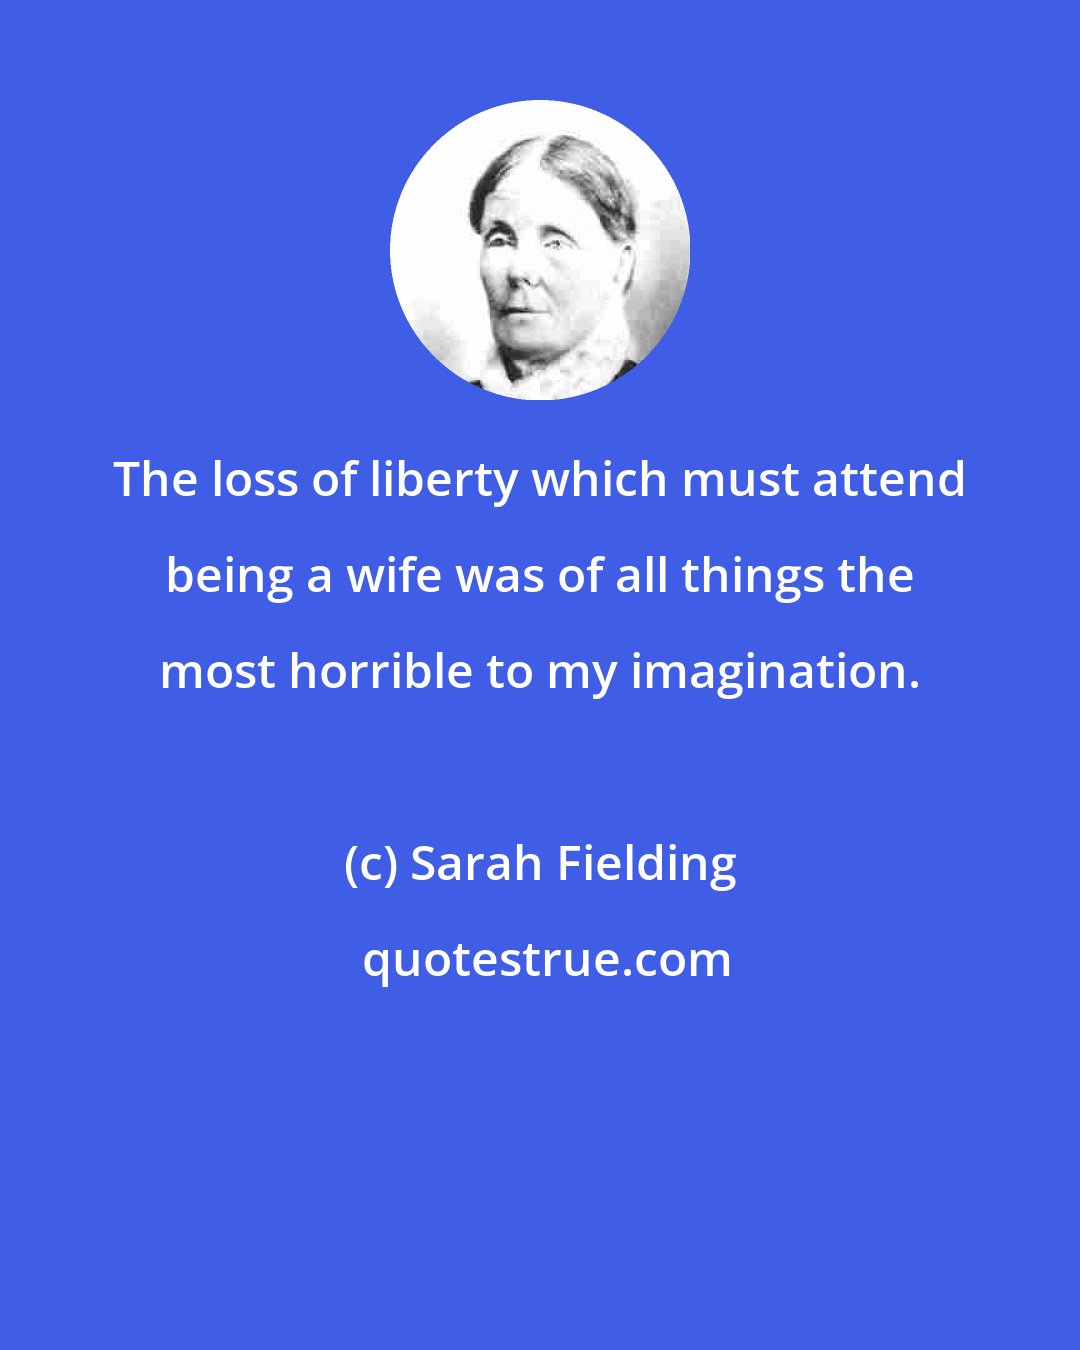 Sarah Fielding: The loss of liberty which must attend being a wife was of all things the most horrible to my imagination.